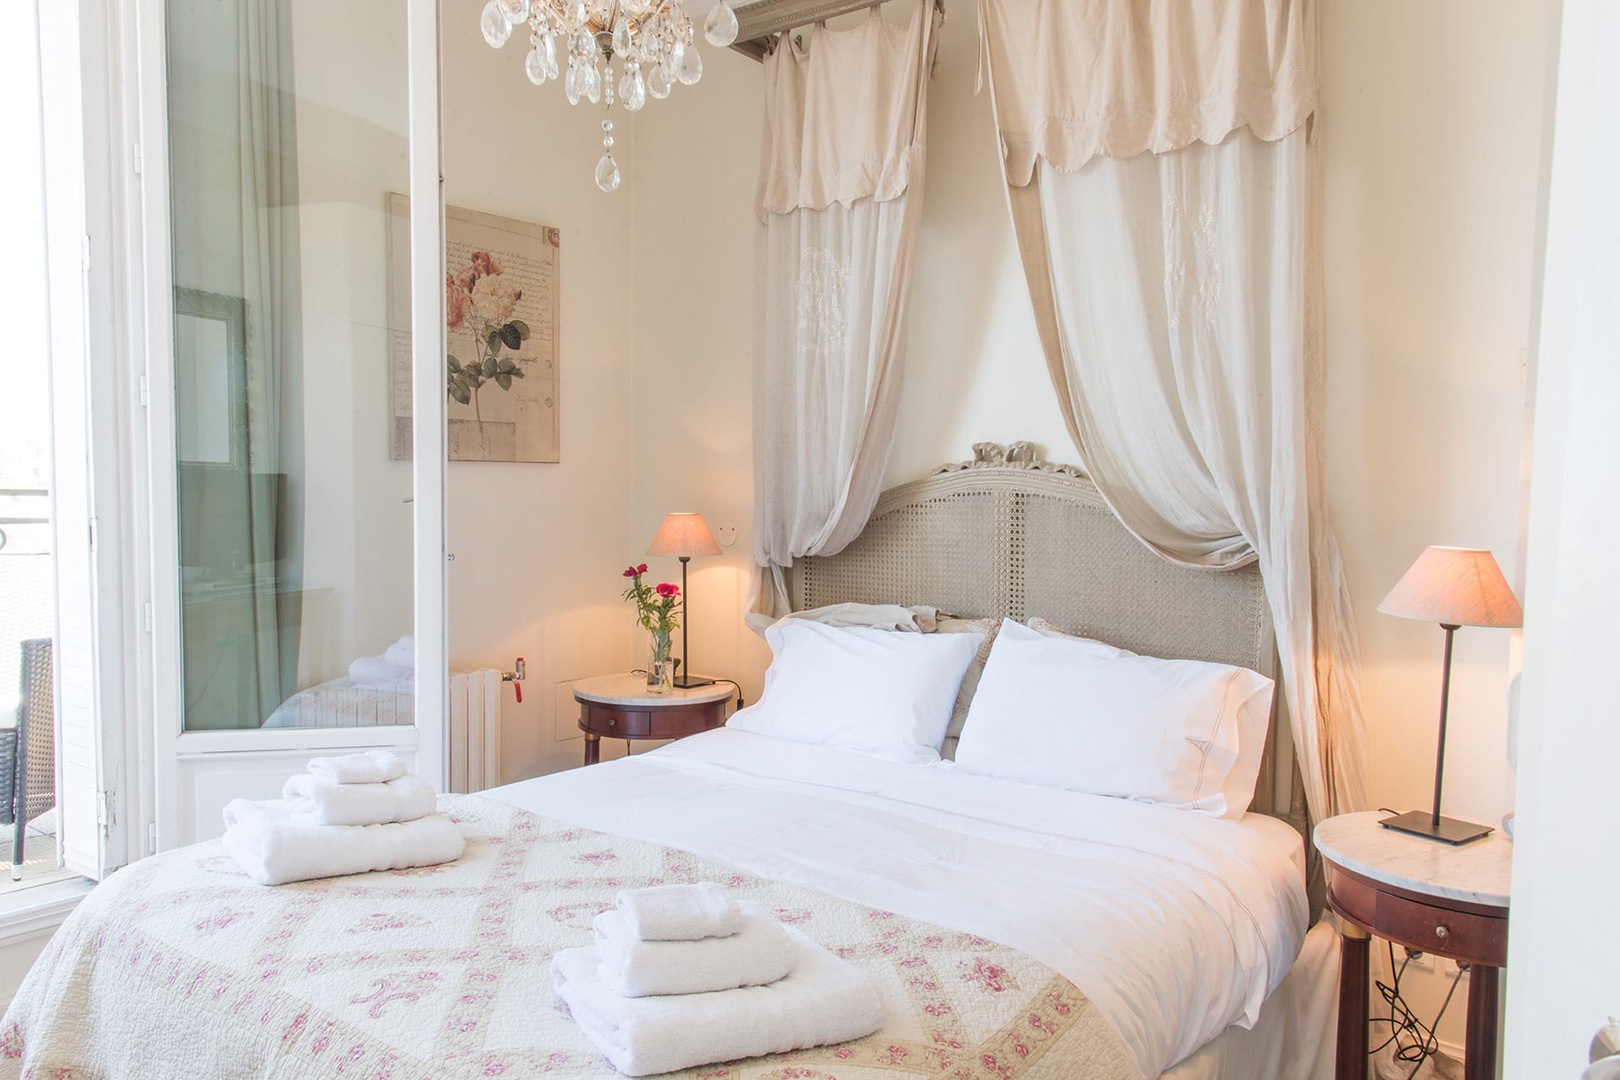 Relax in the romantic bedroom, decorated with a French flair.